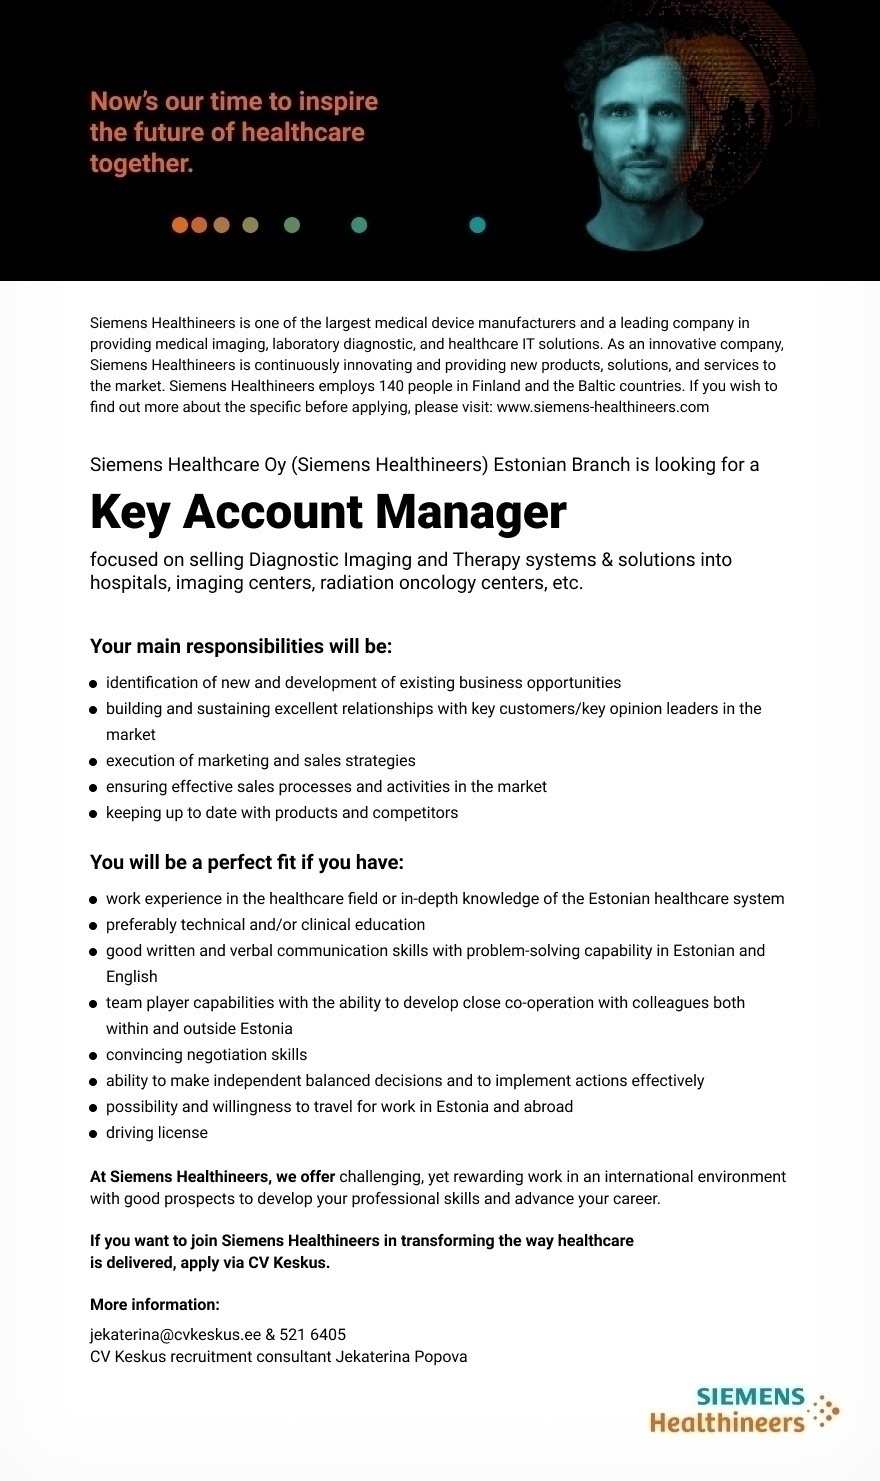 Siemens Healthcare Oy  Key Account Manager